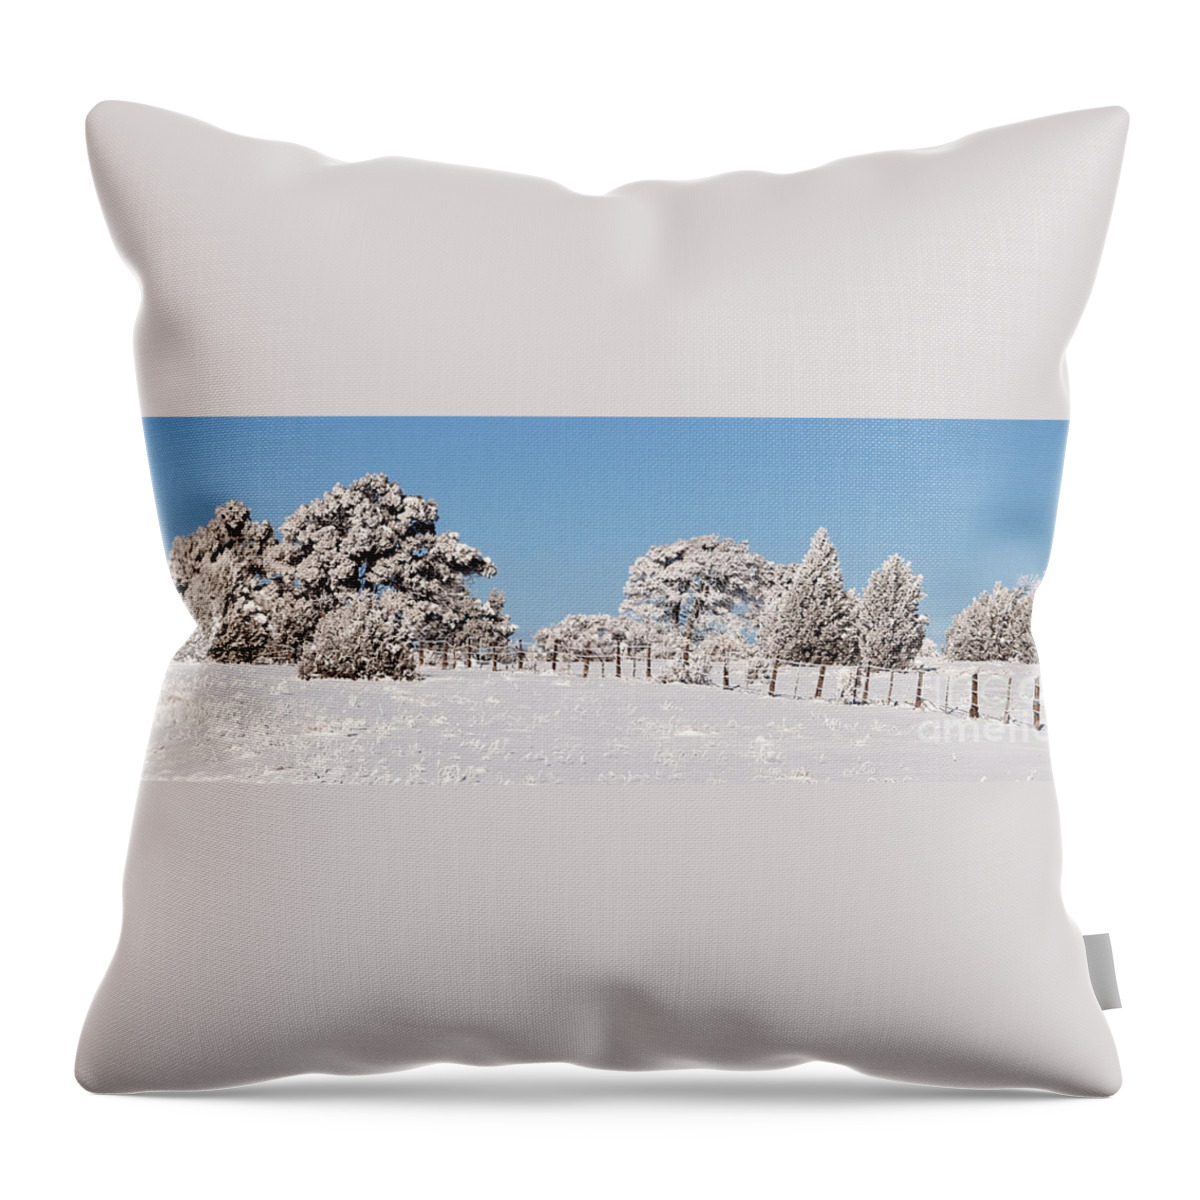 Snow Throw Pillow featuring the photograph Nine Below by Bob and Nancy Kendrick